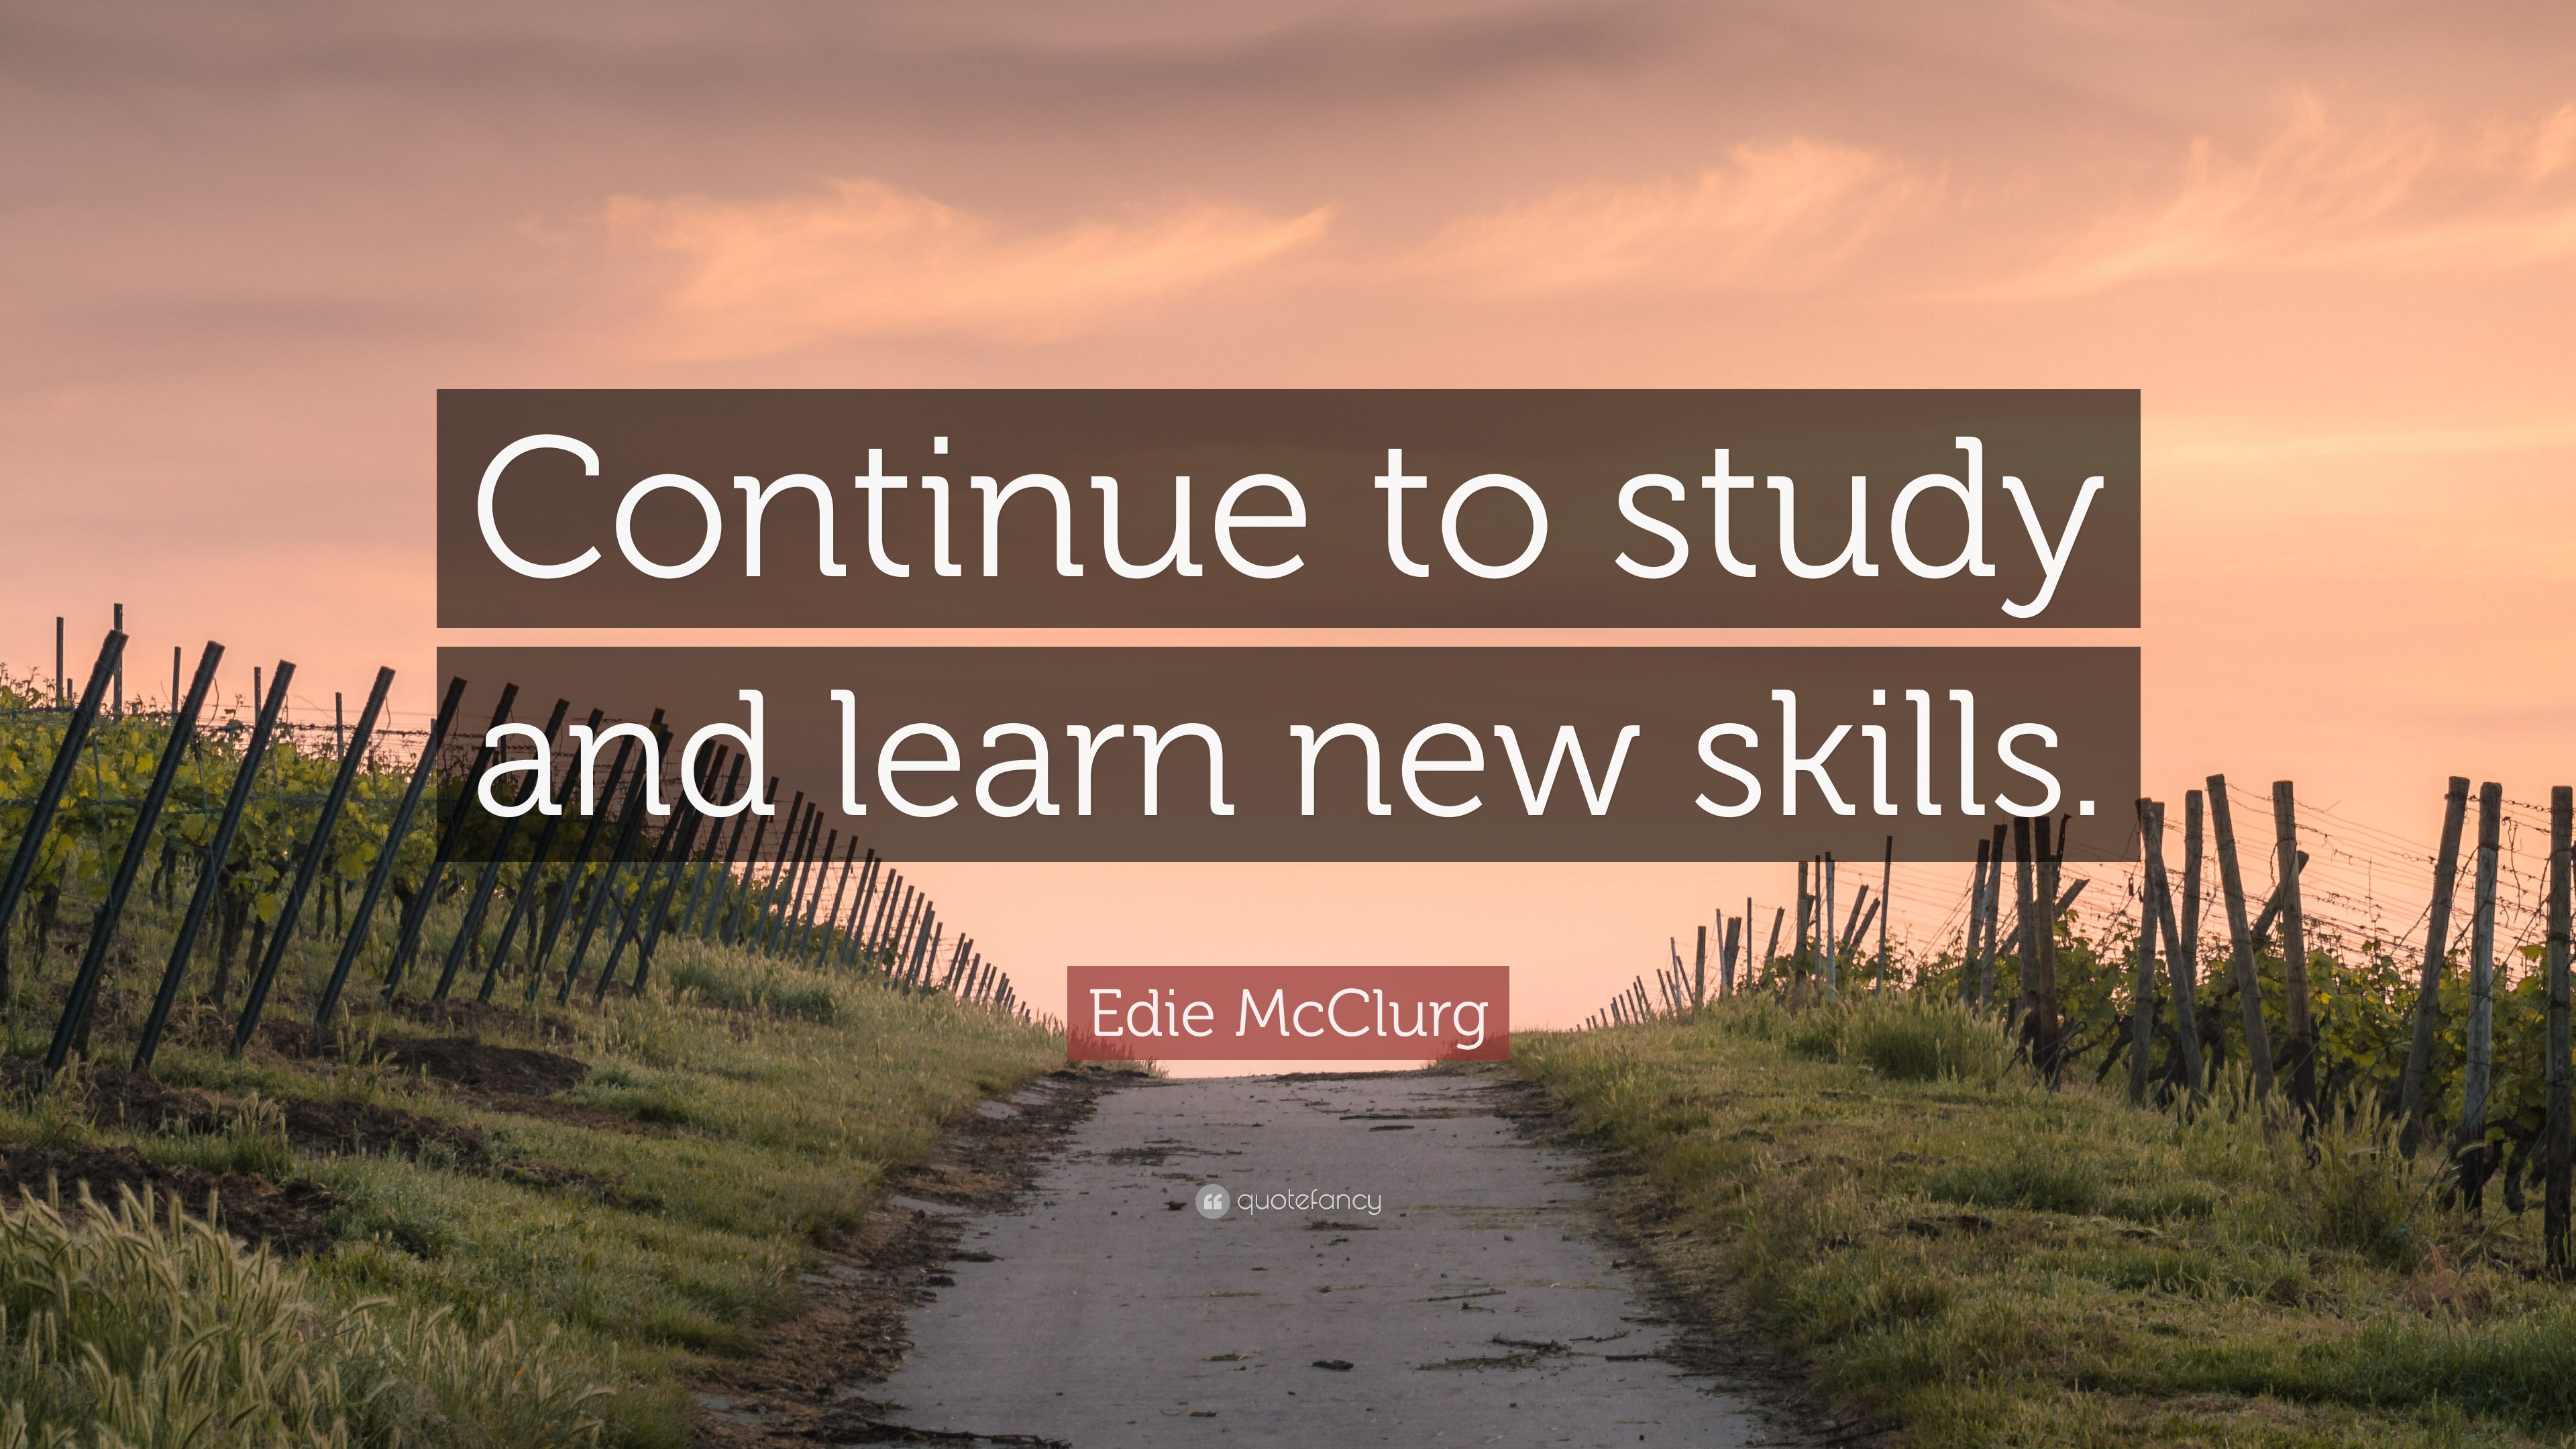 Edie McClurg Quote: “Continue to study and learn new skills.”